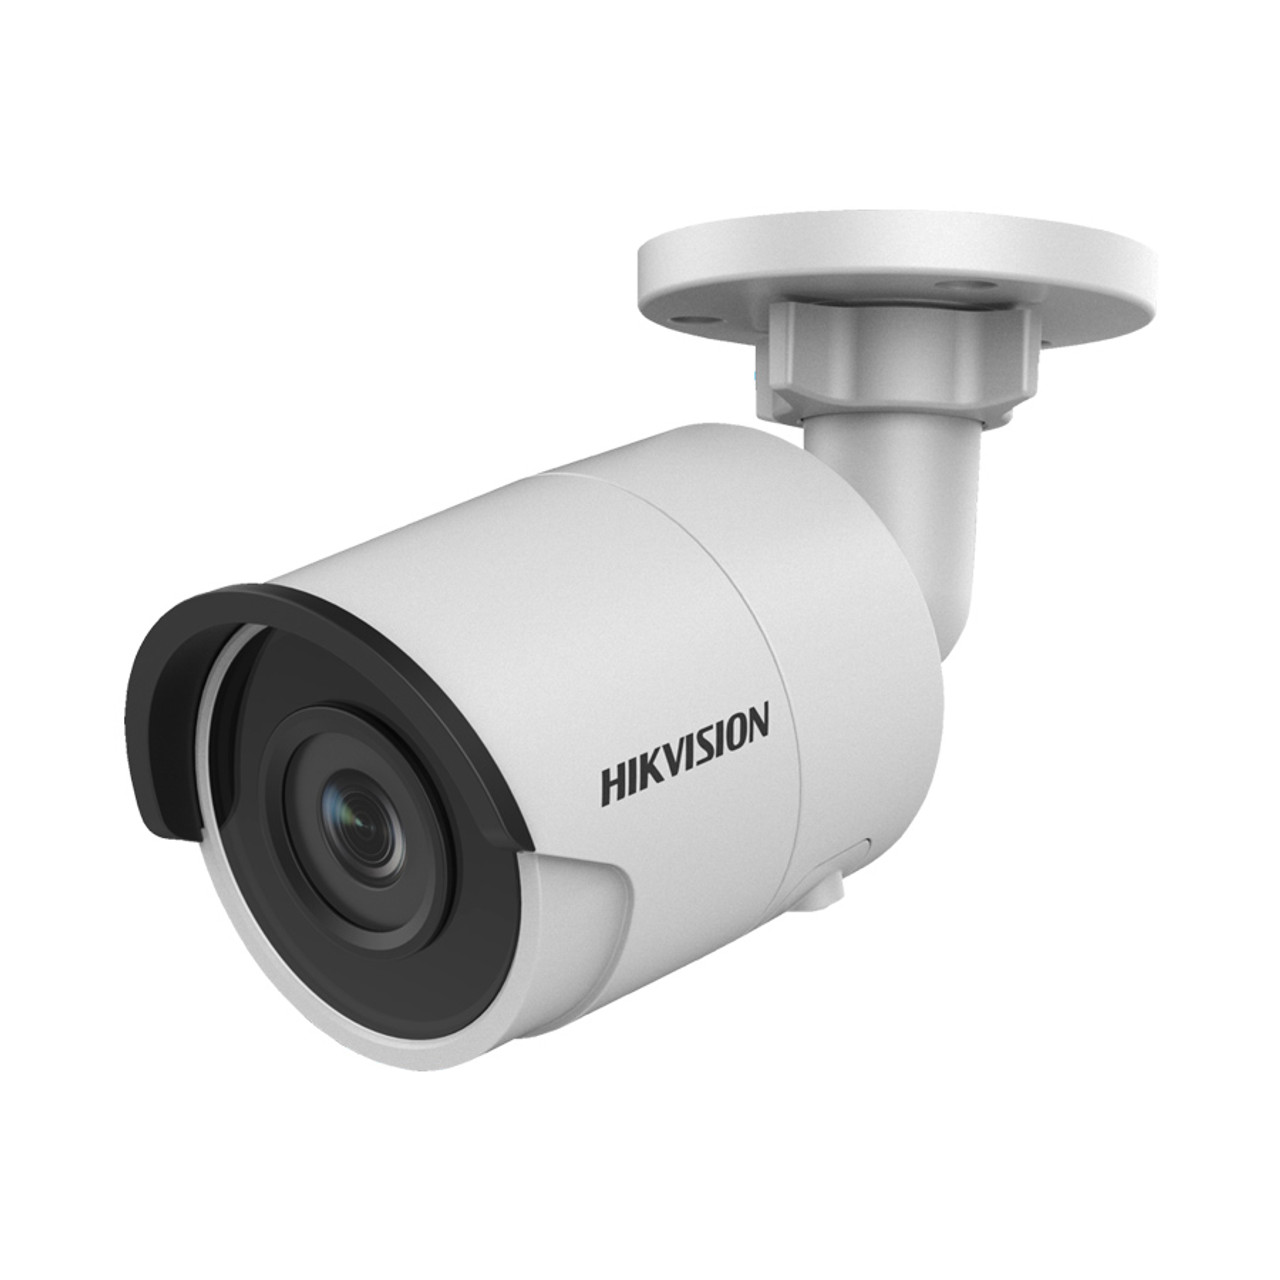 Hikvision DS 2CD2025FWD I 2 8mm 2MP H265 Outdoor Mini 